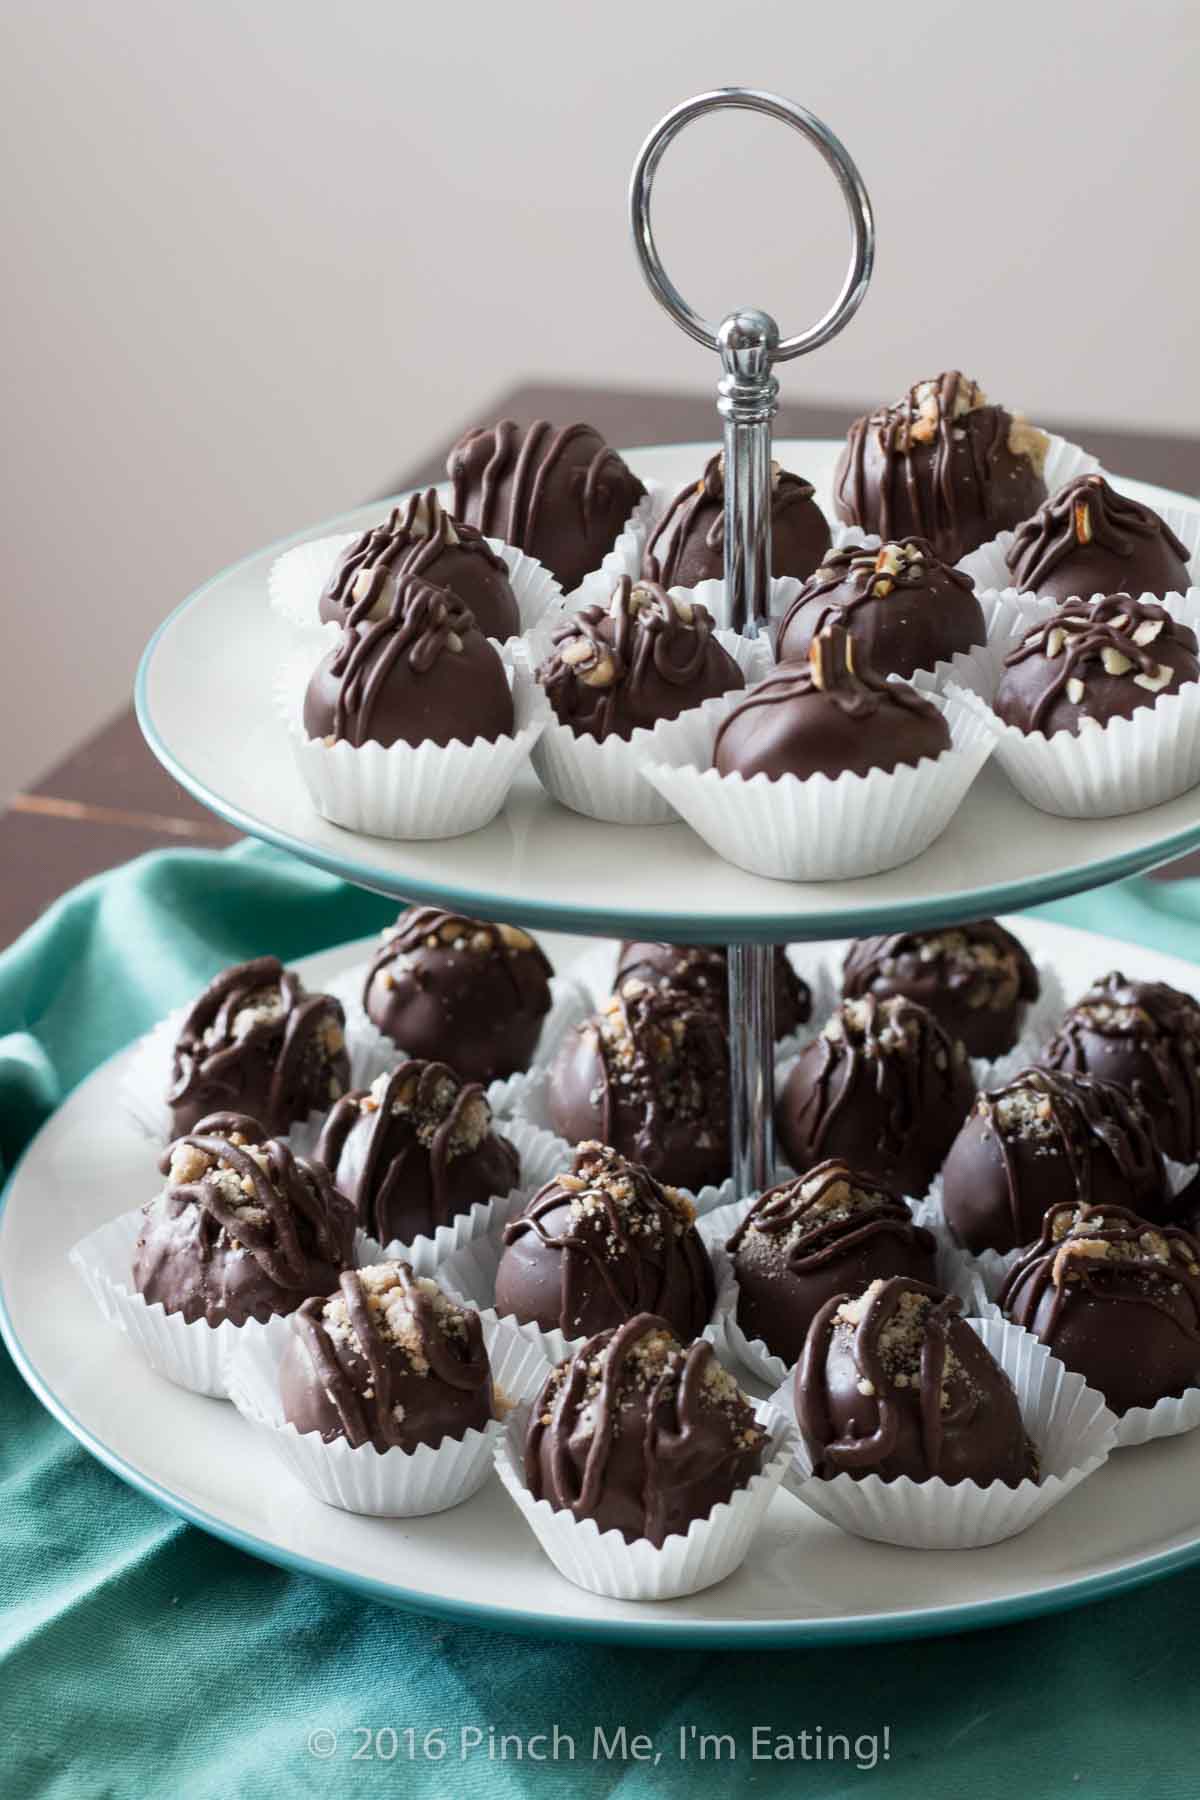 Coconut Truffles with Brazil Nut or Almond Butter